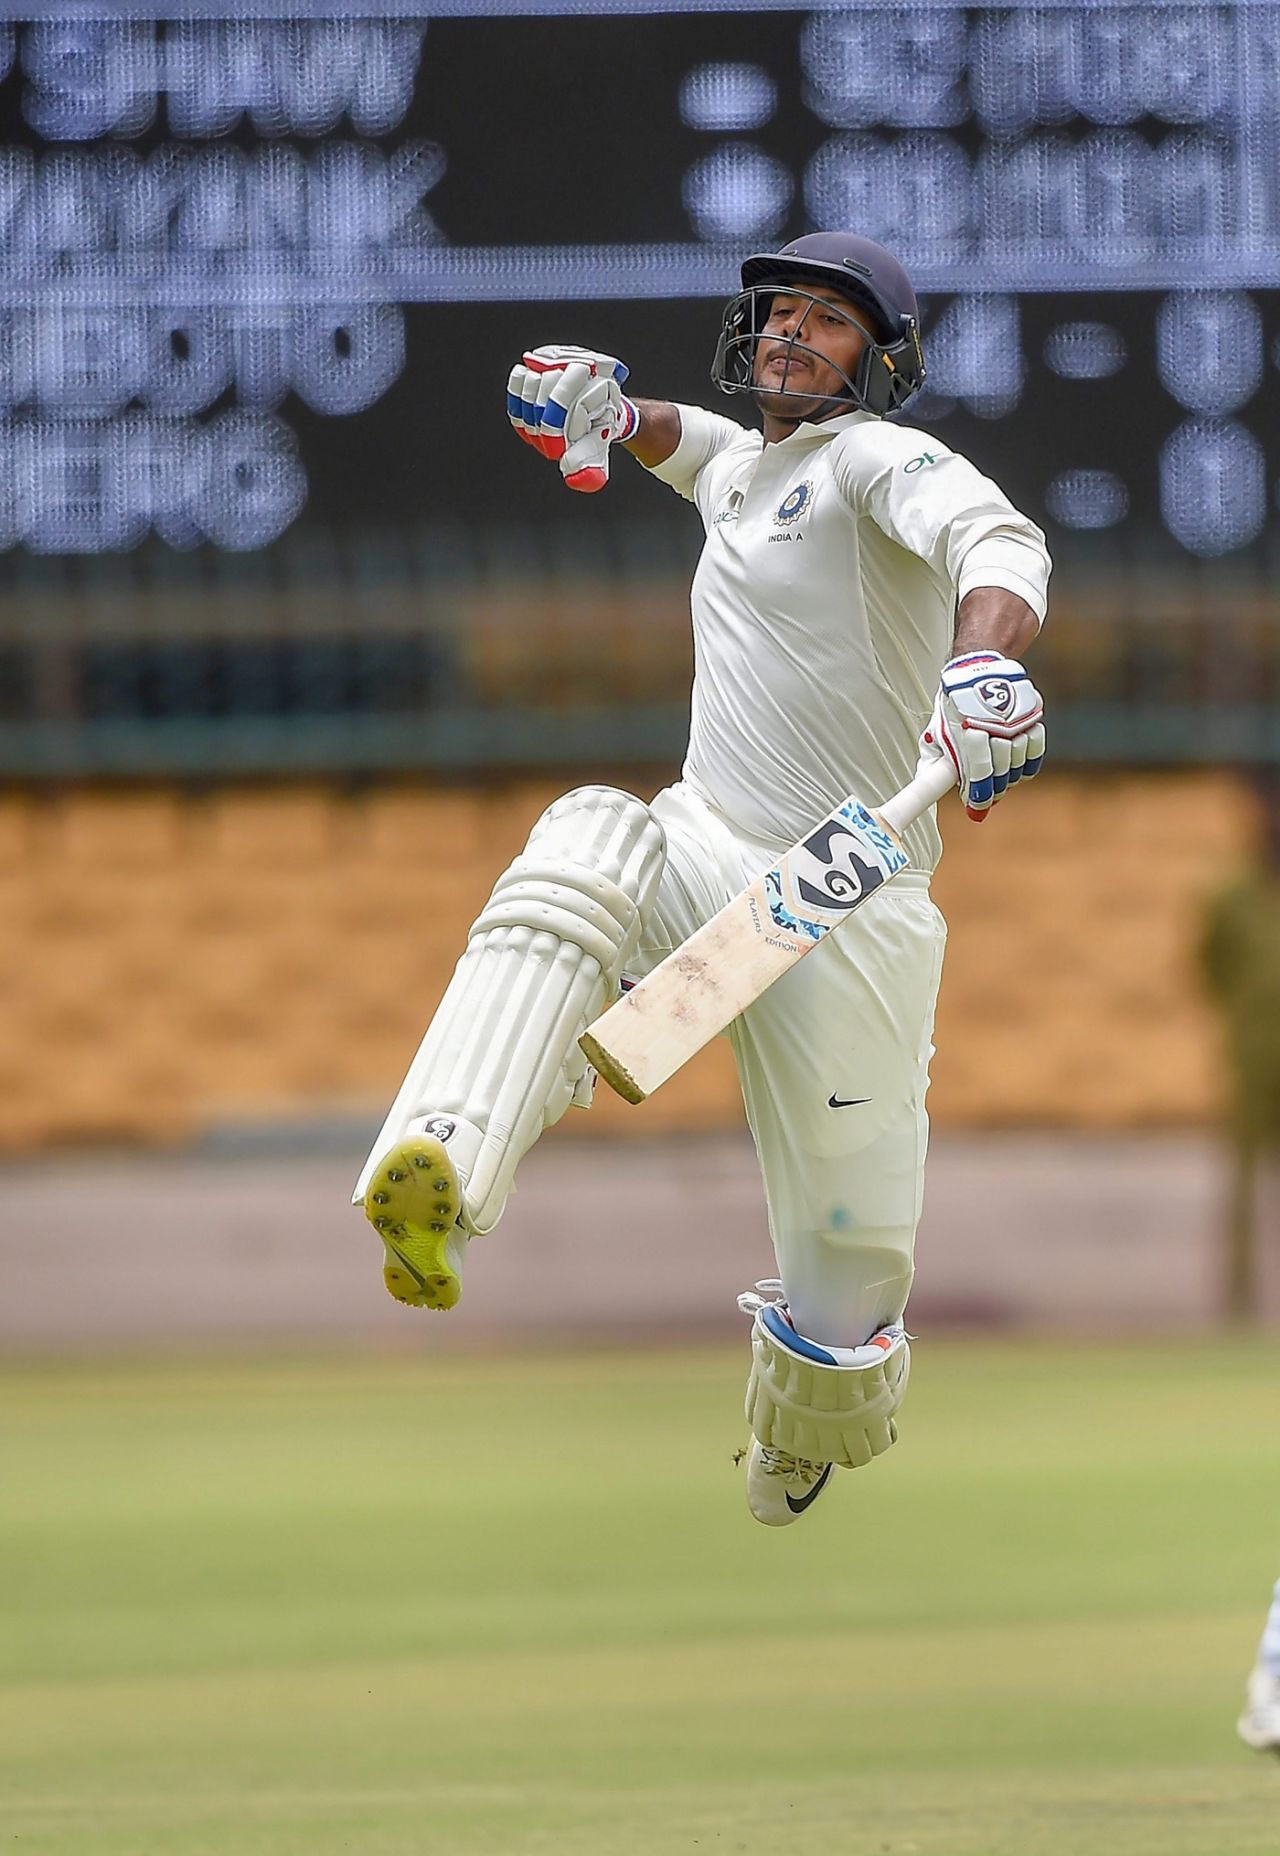 Mayank Agarwal jumps in jubilation, India A v South Africa A, 1st unofficial Test, 2nd day, Bengaluru, August 5, 2018